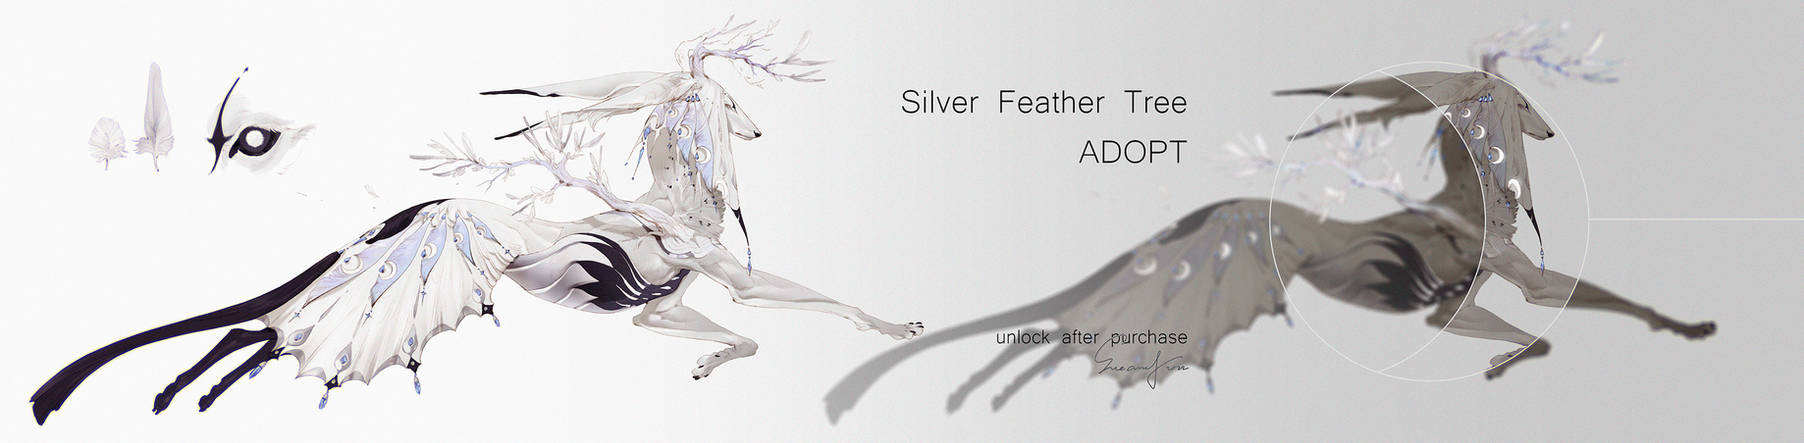 Silver Feather Tree